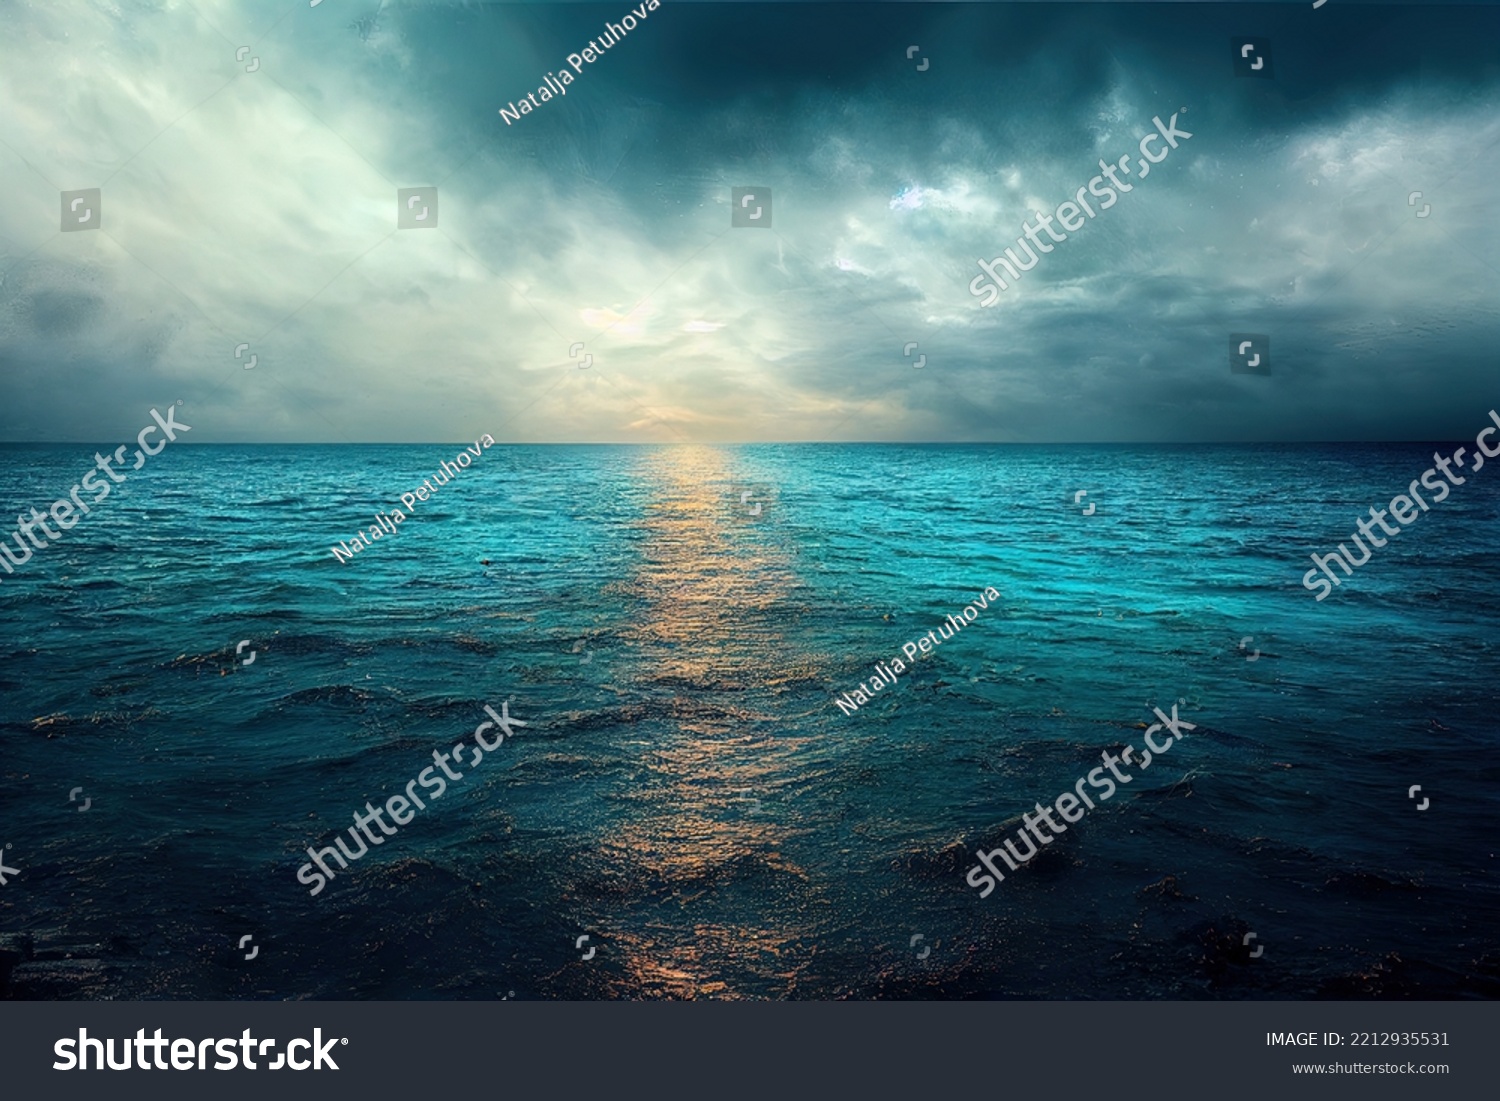 Calm weather on sea or ocean with clouds #2212935531